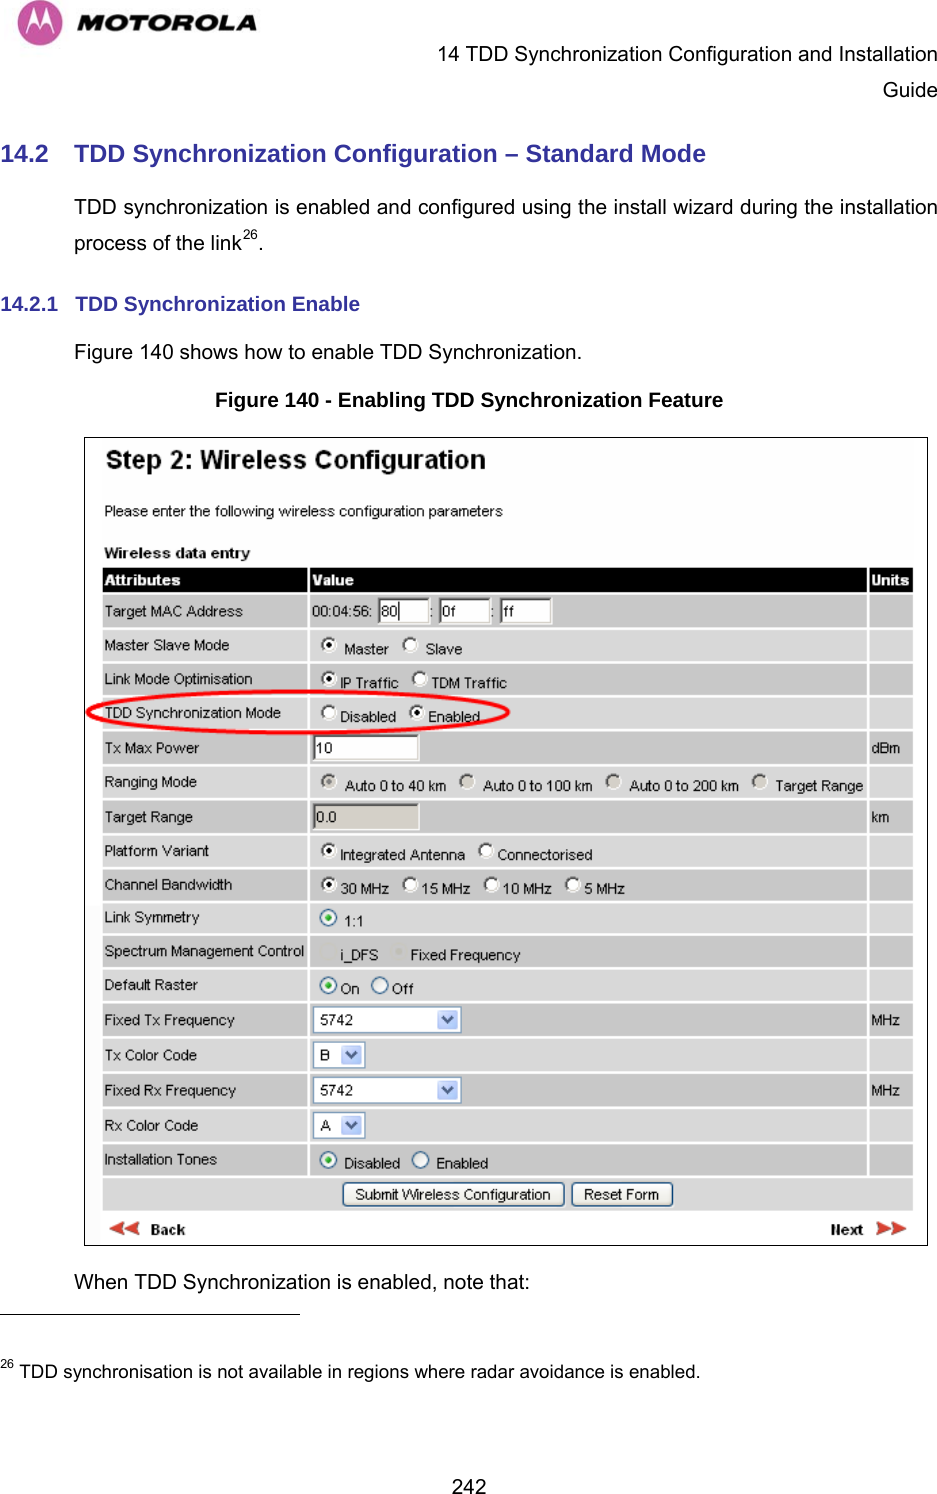   14 TDD Synchronization Configuration and Installation Guide  24214.2  TDD Synchronization Configuration – Standard Mode TDD synchronization is enabled and configured using the install wizard during the installation process of the link26.  14.2.1  TDD Synchronization Enable Figure 140 shows how to enable TDD Synchronization. Figure 140 - Enabling TDD Synchronization Feature  When TDD Synchronization is enabled, note that:                                                       26 TDD synchronisation is not available in regions where radar avoidance is enabled. 